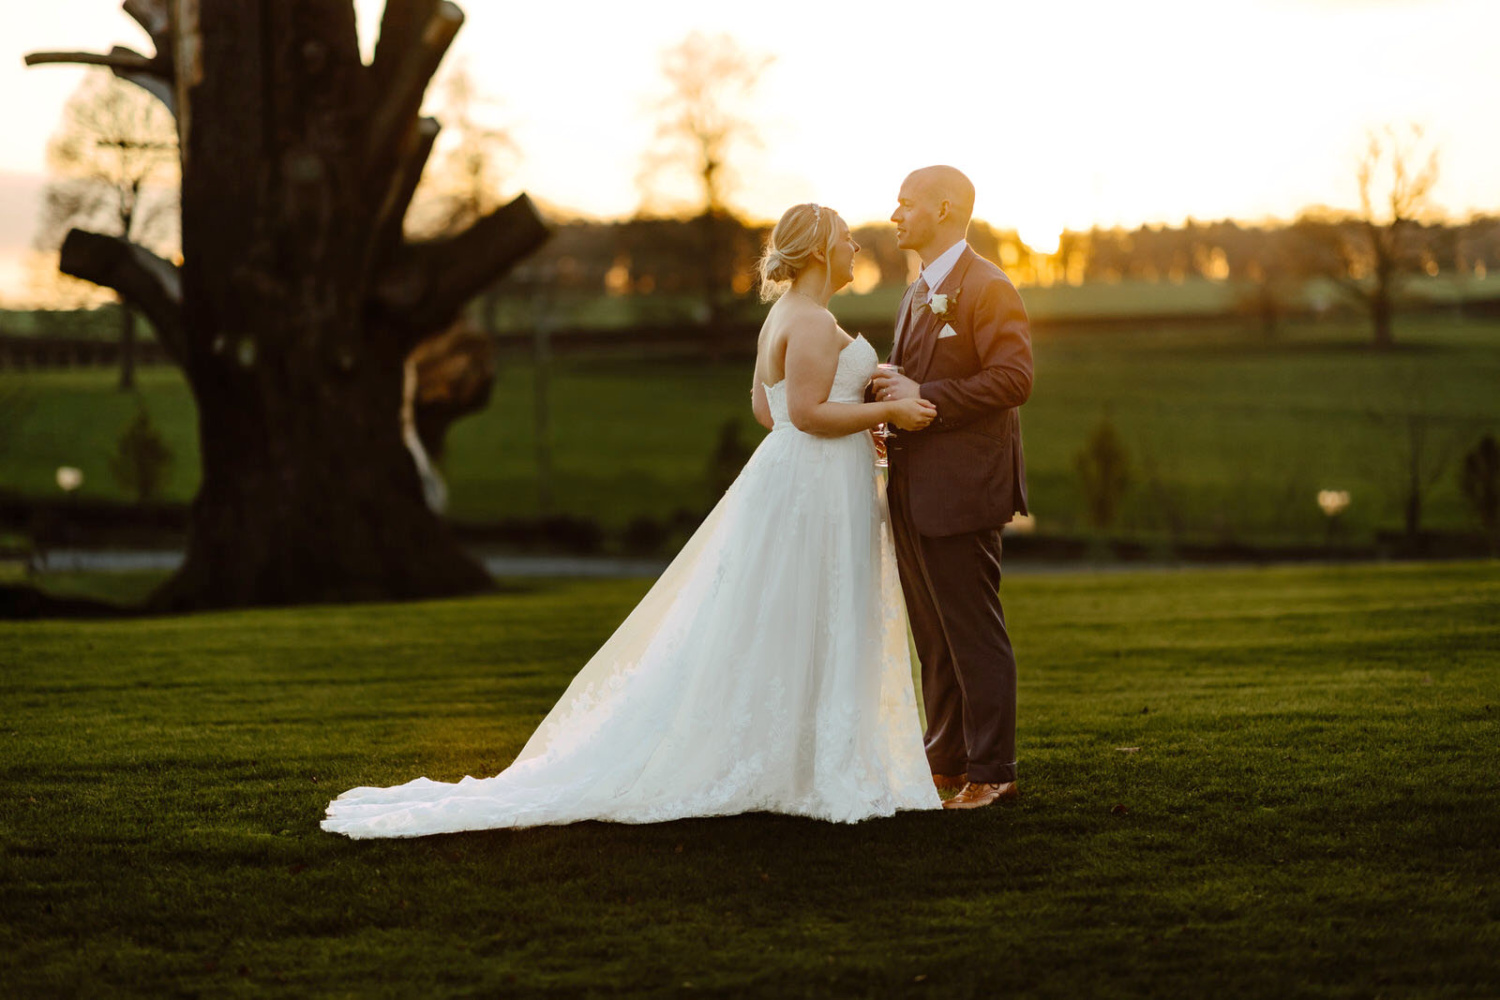 The Bride and the groom posing for the portraits at garden at Rowton Castle with a beautiful sunset at the background.